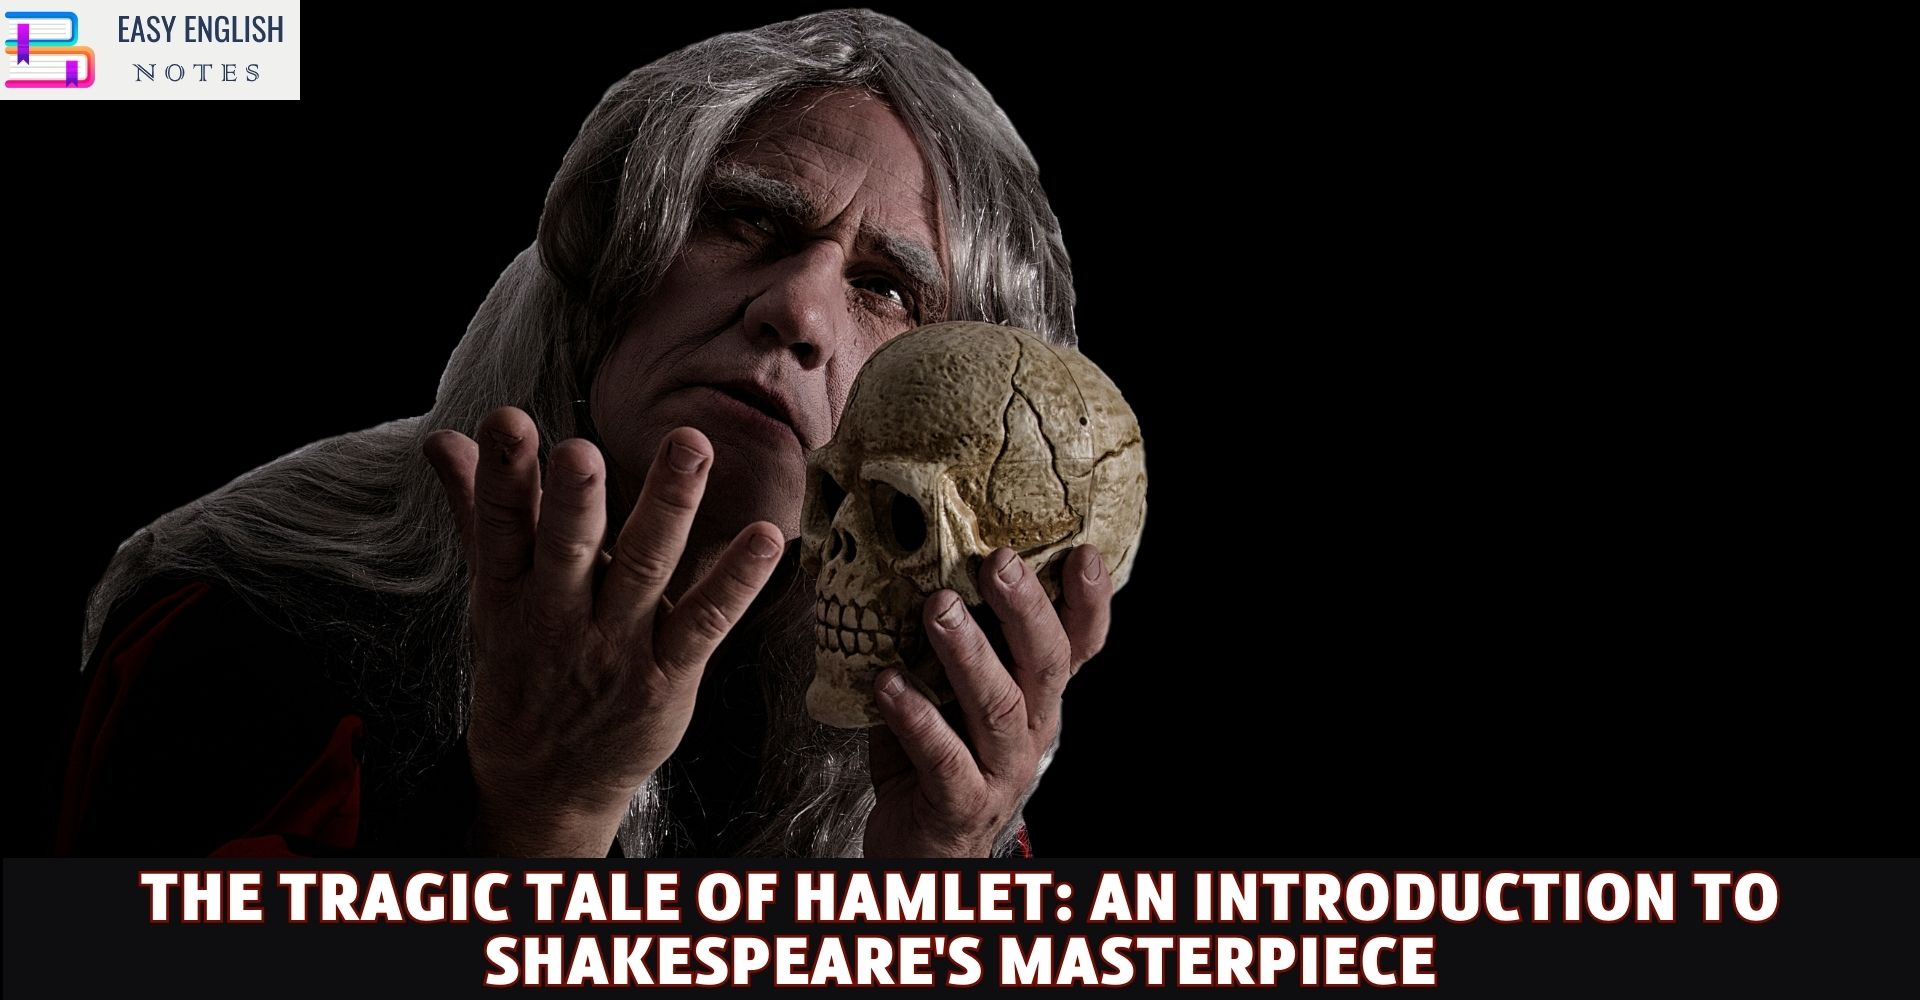 The Tragic Tale of Hamlet: An Introduction to Shakespeare's Masterpiece